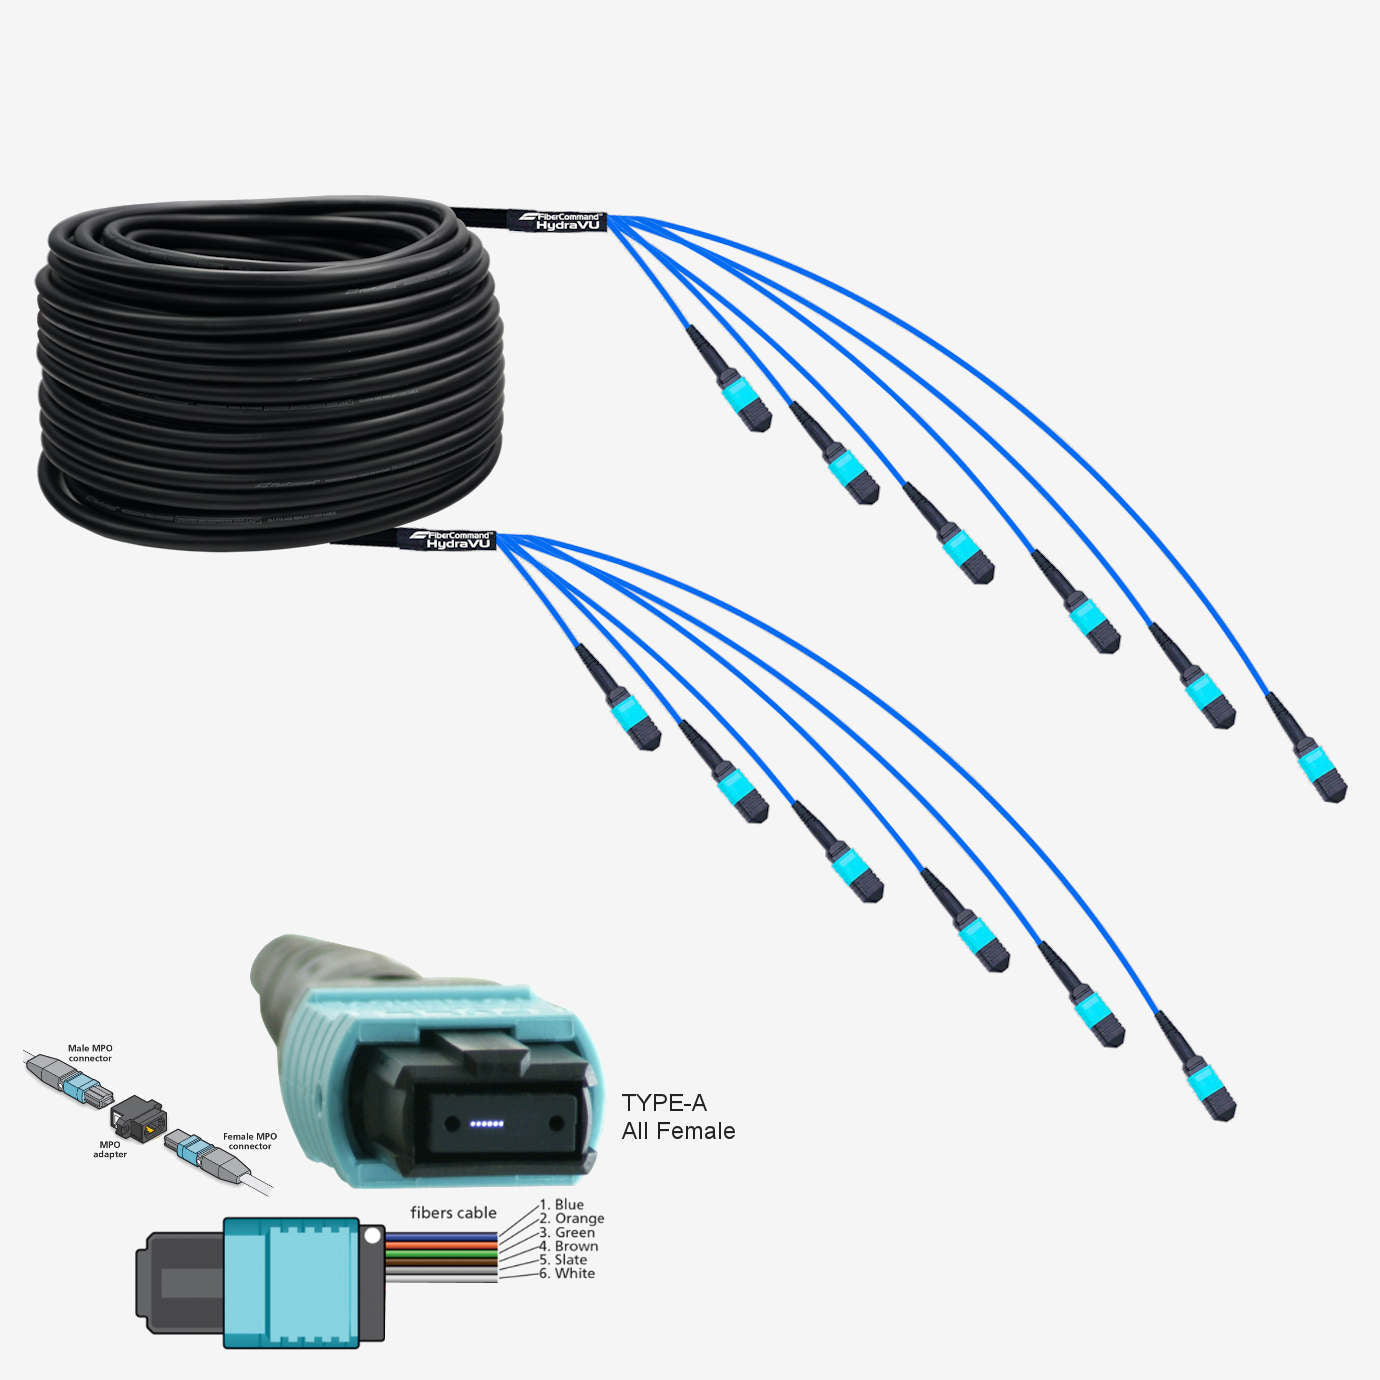 All Types of Fiber Optic Connectors on Sale